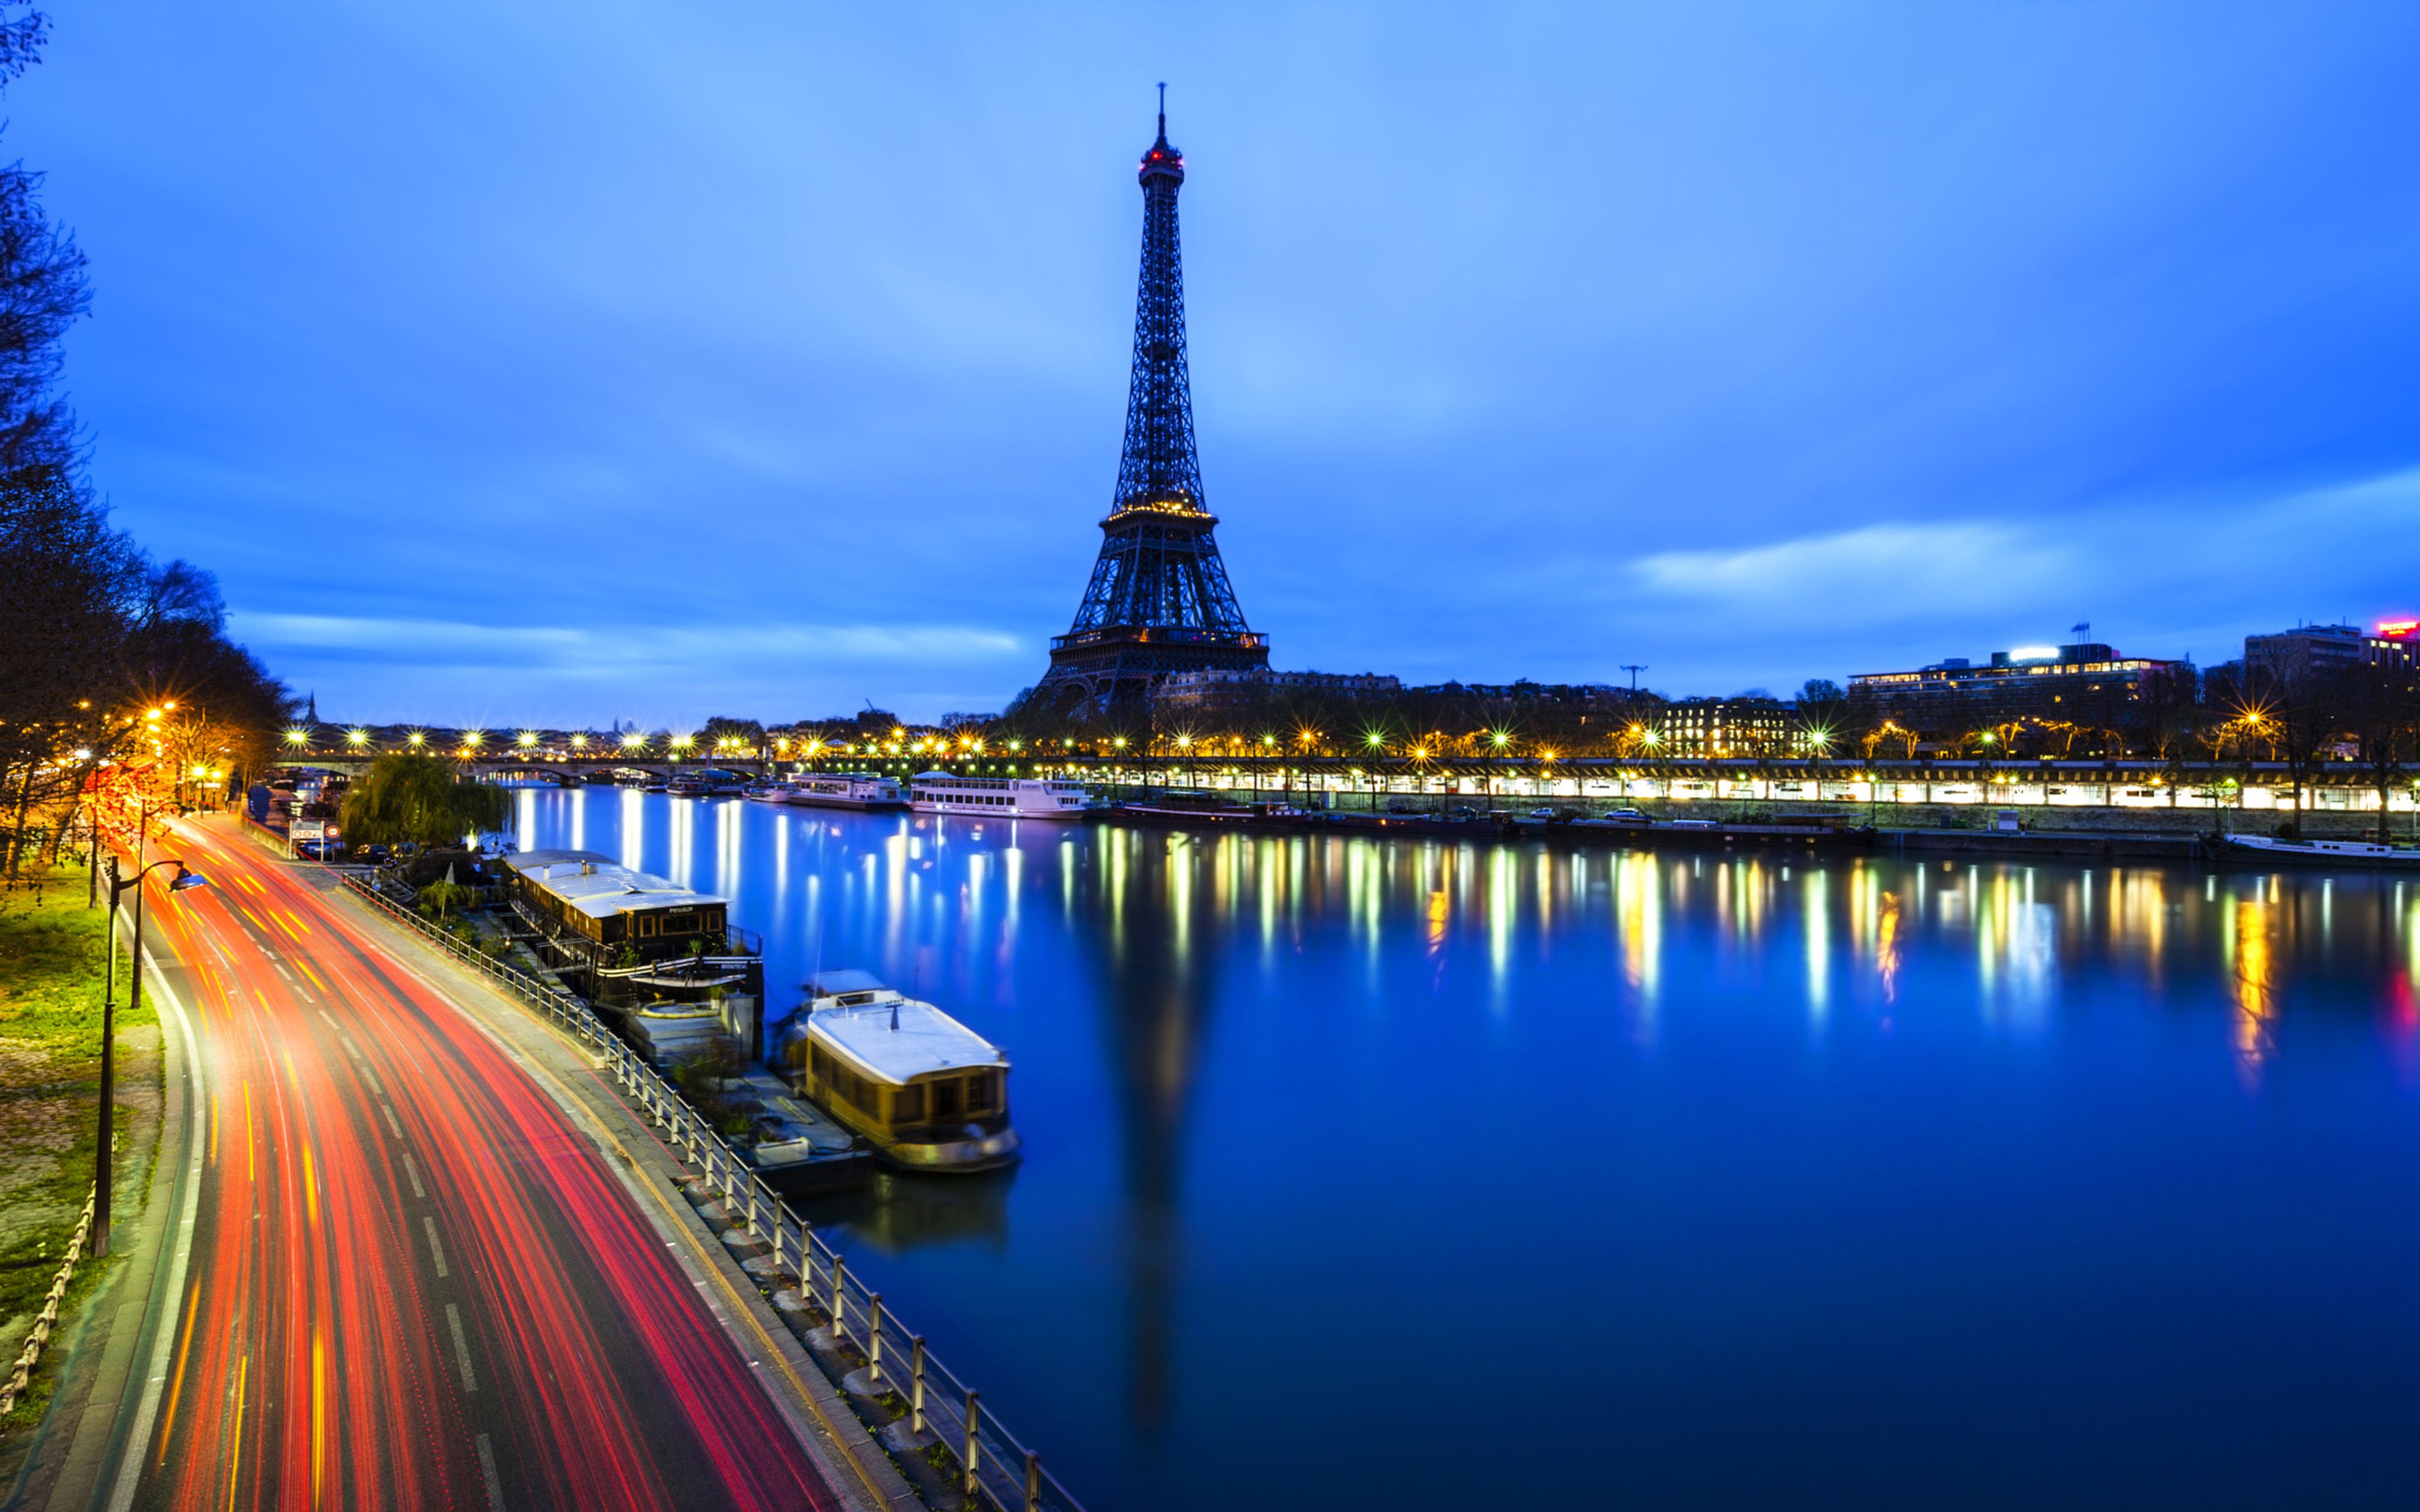 Morning In Paris France Eiffel Tower And River Seine 4k Ultra HD Desktop Wallpaper For Computers Laptop Tablet And Mobile Phones 3840х2400, Wallpaper13.com